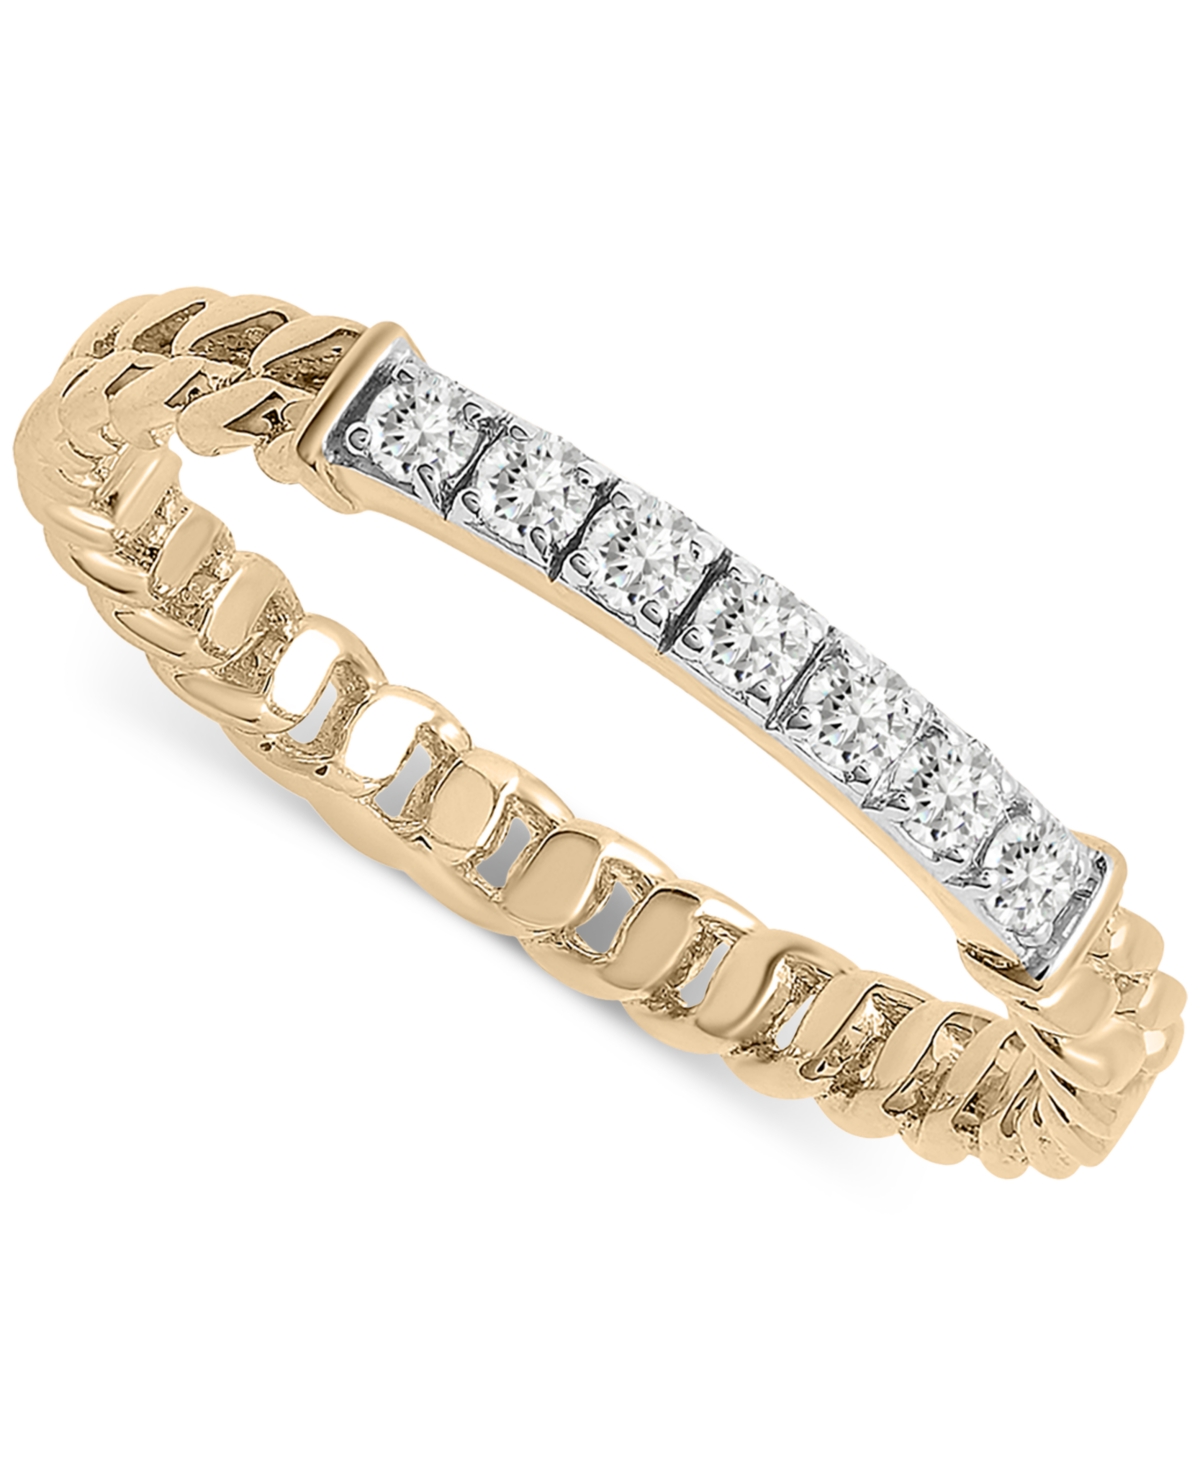 Diamond Bar Chain Link Ring (1/6 ct. t.w.) in Gold Vermeil, Created for Macy's - Gold Vermeil